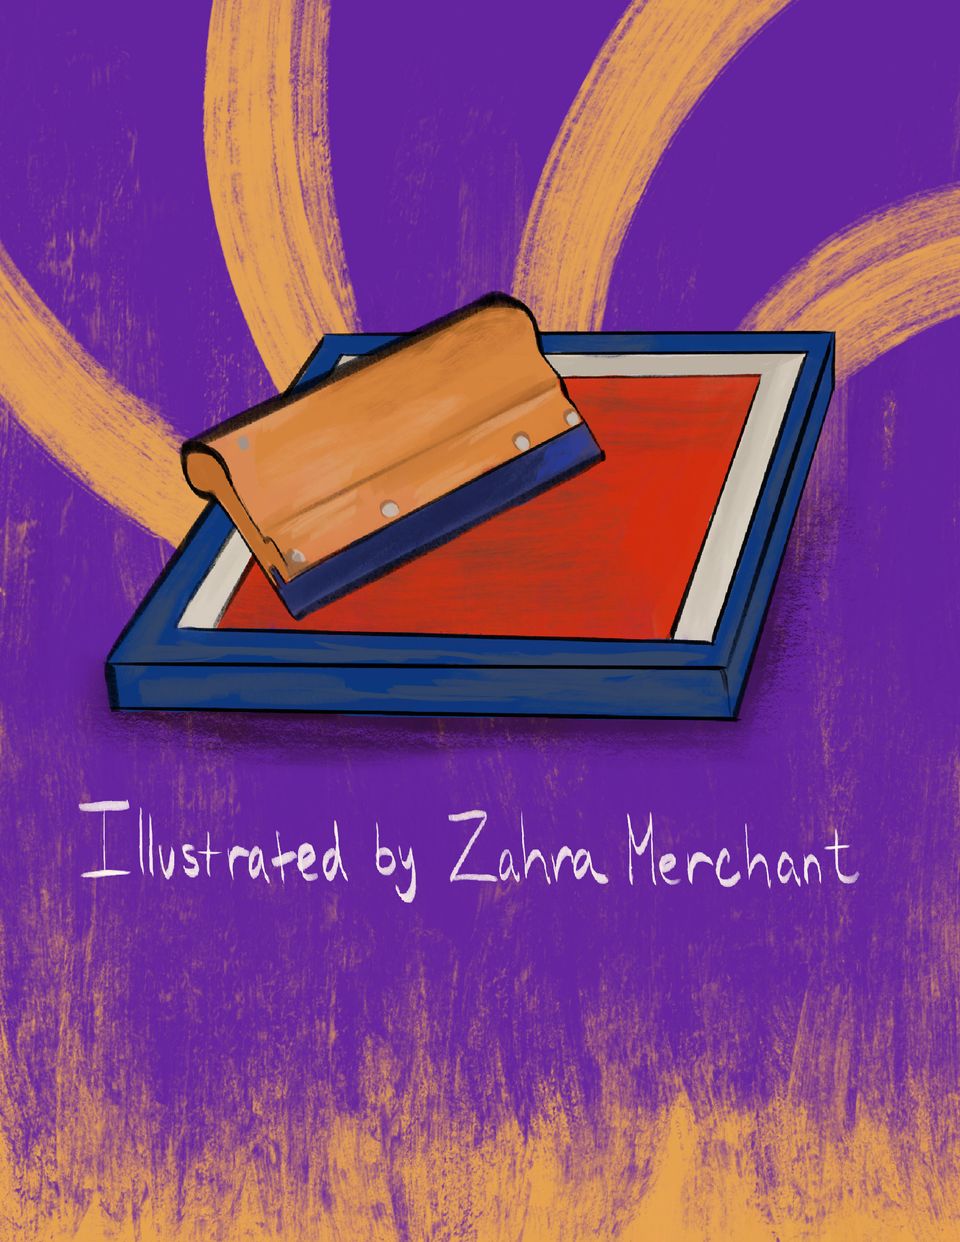 A printing screen and tool sit on a purple and yellow background with white text reading: "Illustrated by Zahra Merchant."